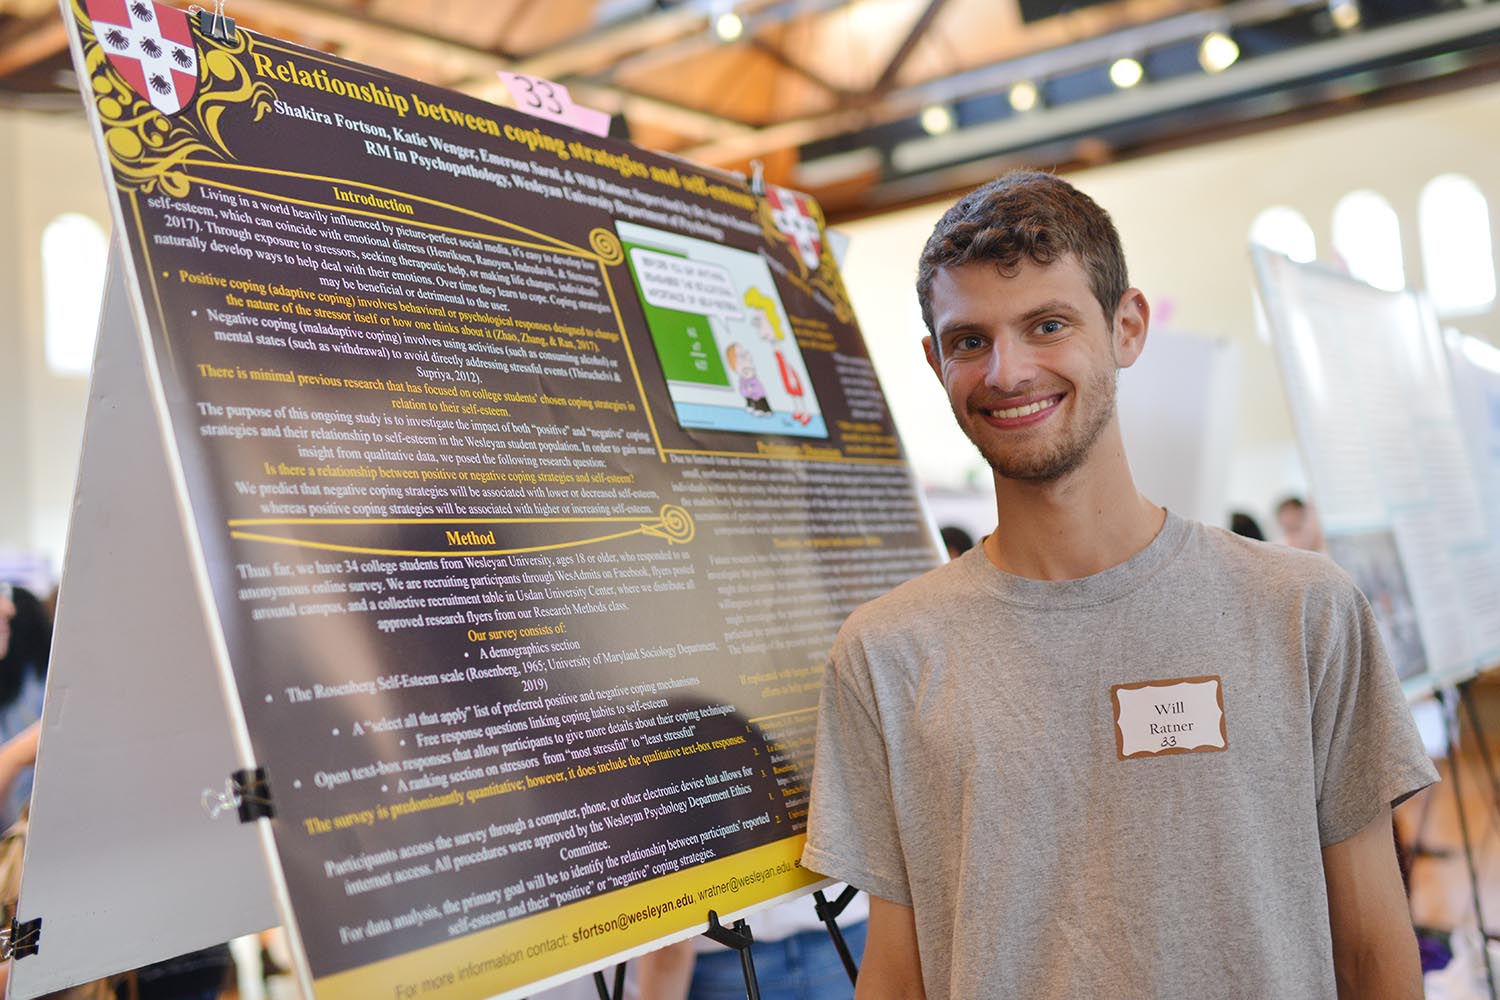 Will Ratner '22 shared his poster titled "Relationship between Coping Strategies and Self-Esteem." Ratner's advisor is Sarah Kamens, the David Scott Williams Visiting Professor of Psychology